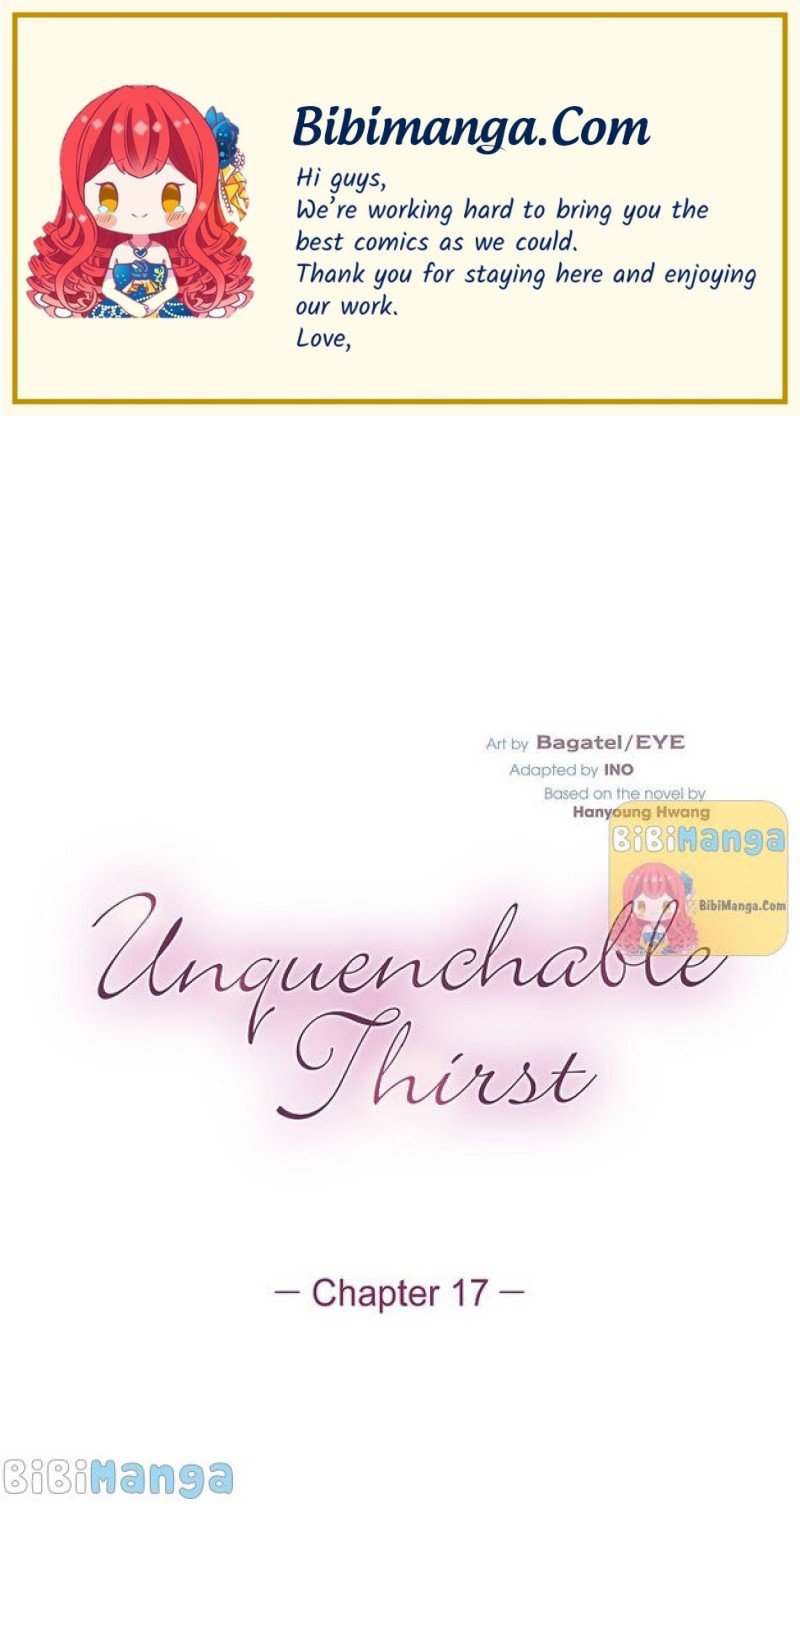 Unquenchable Thirst chapter 17